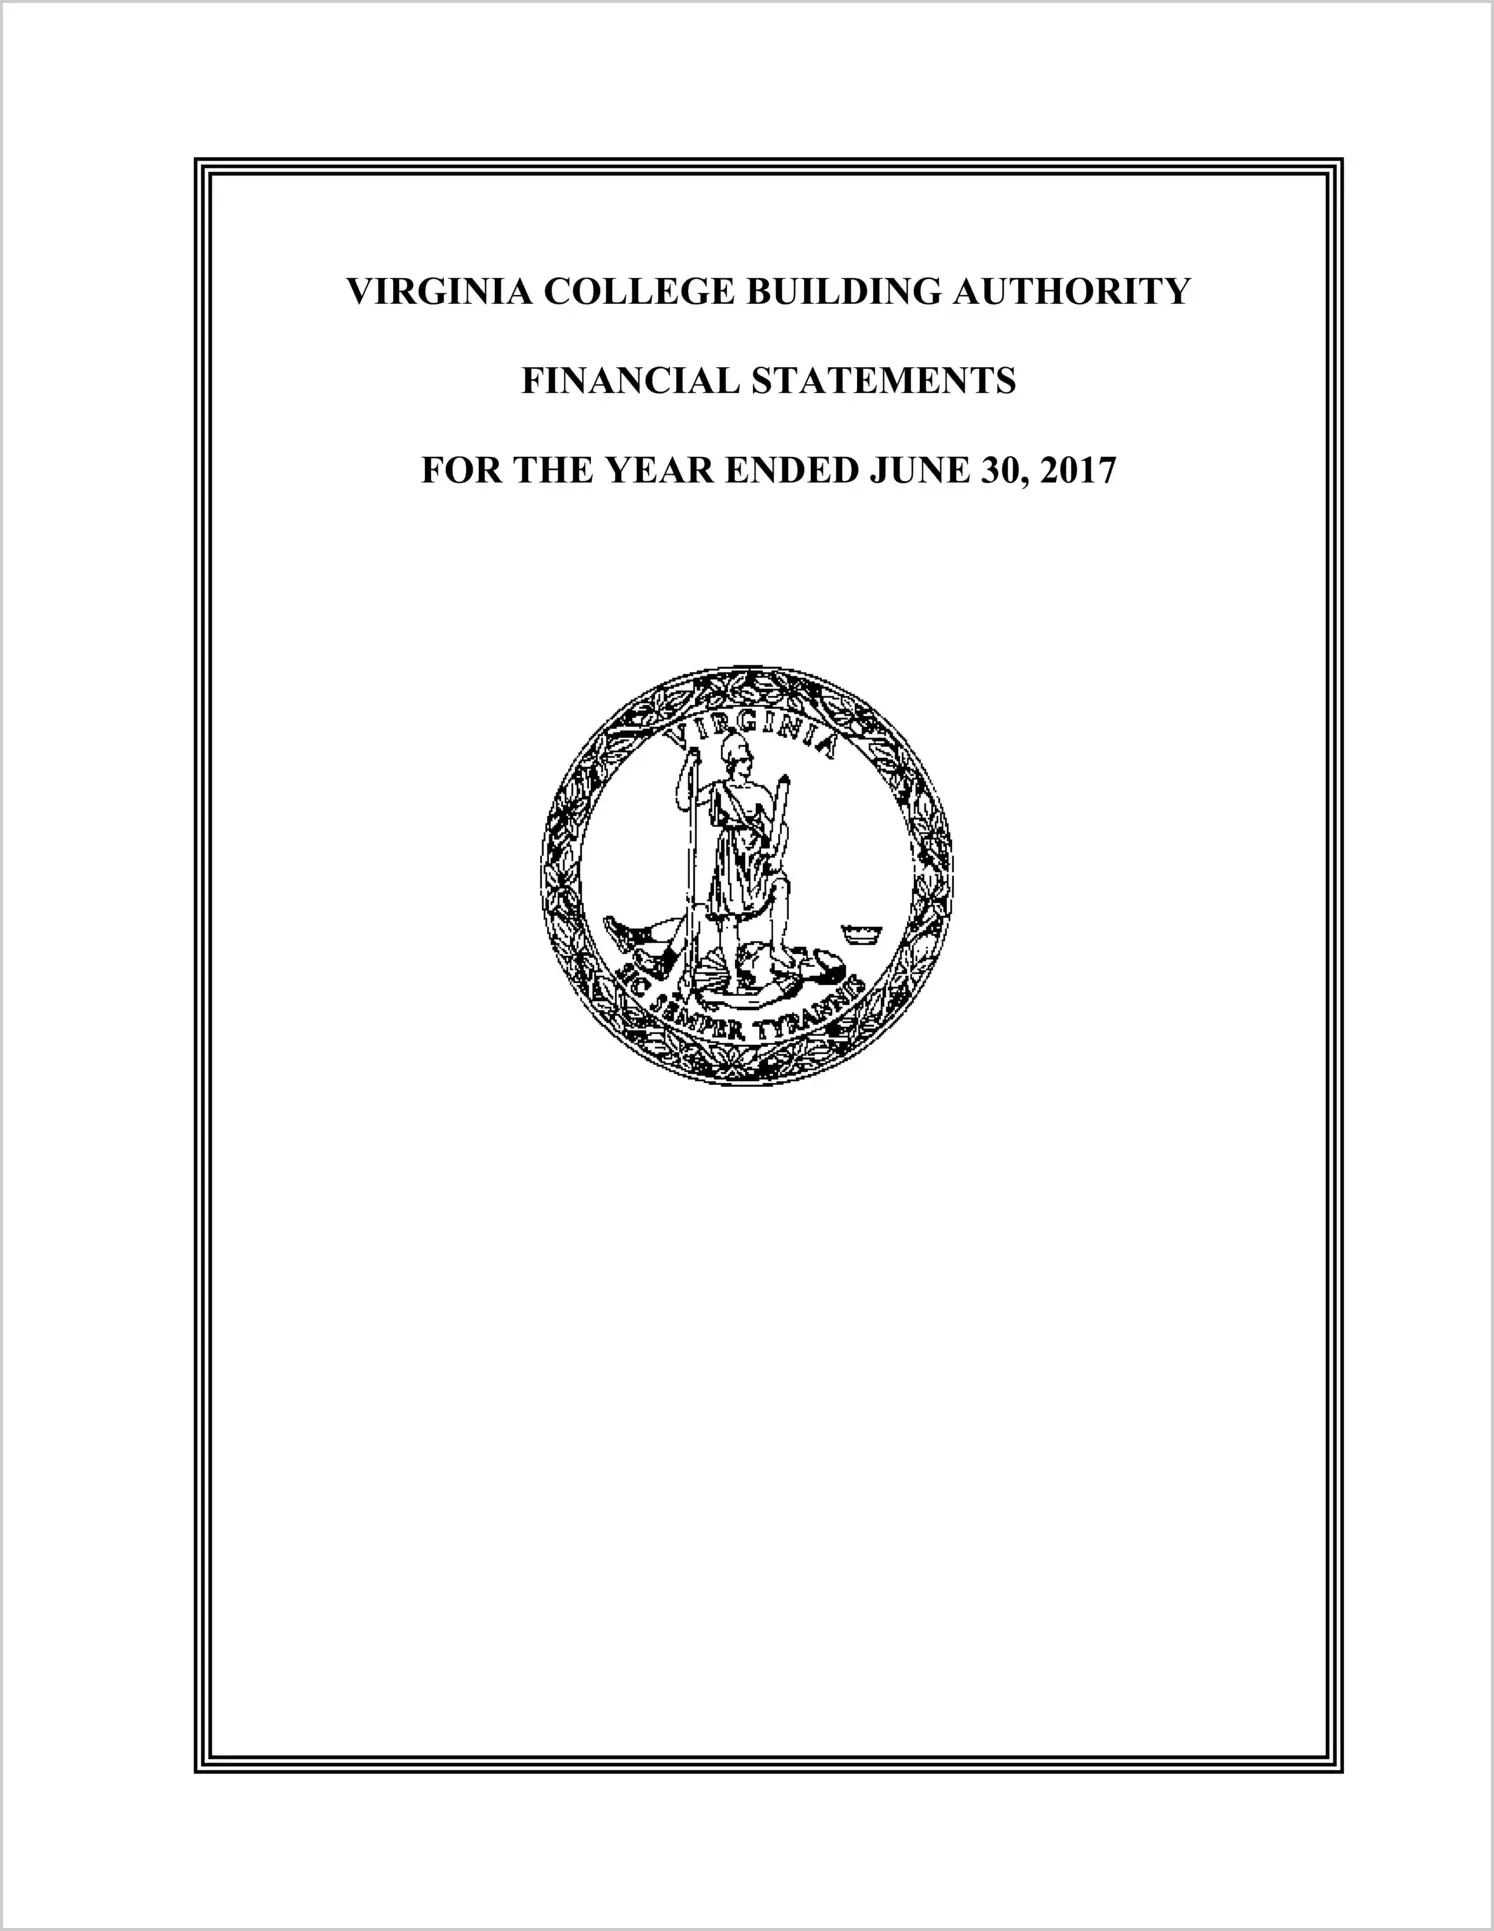 Virginia College Building Authority Financial Statements for the year ended June 30, 2017